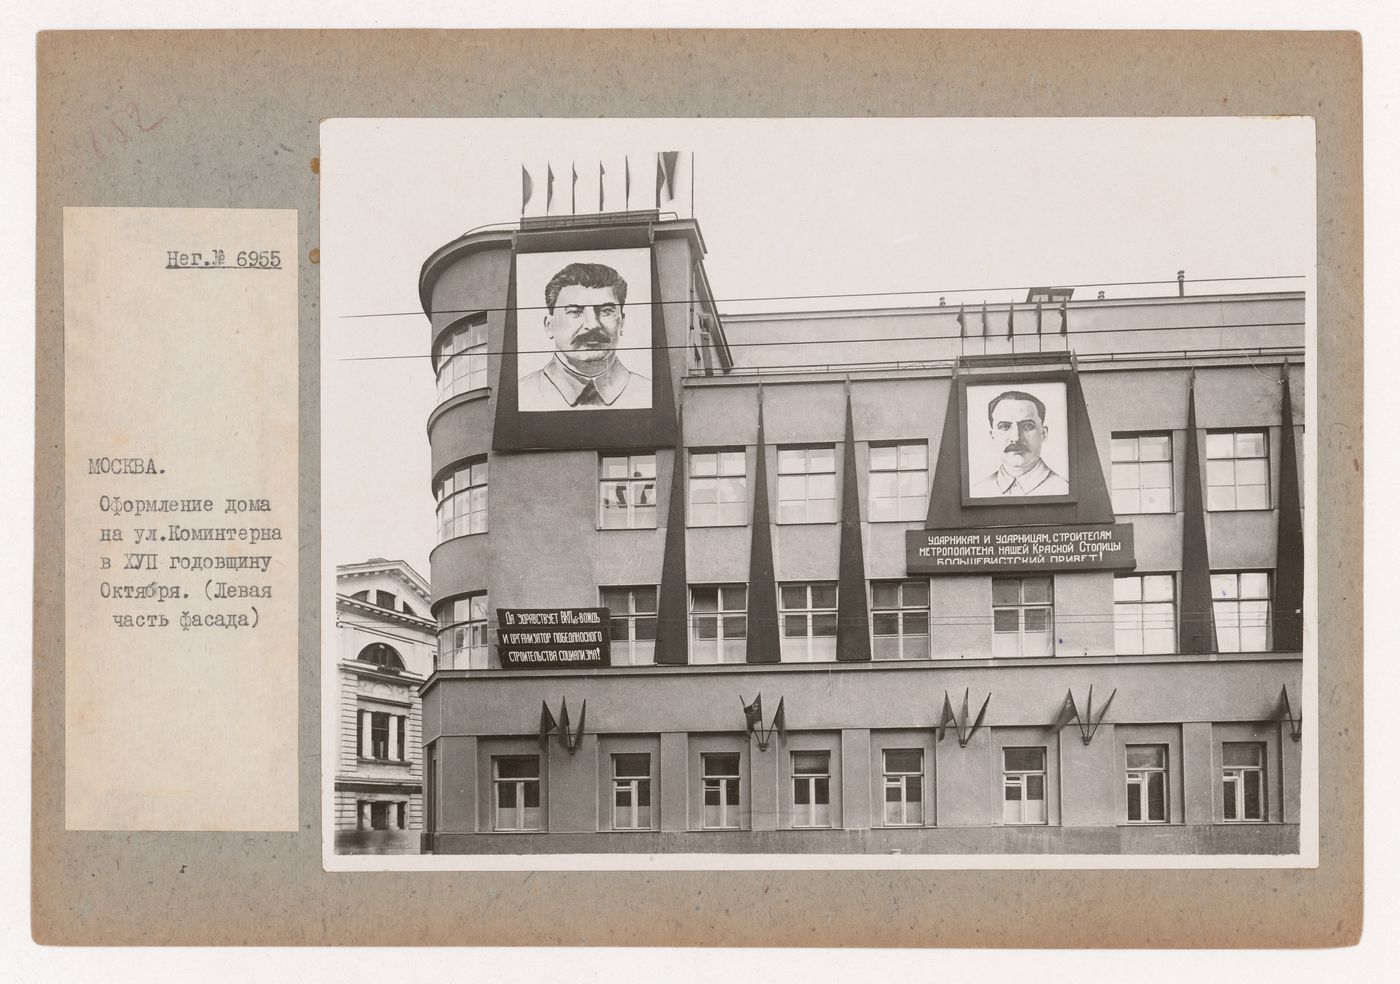 View of a building decorated with portraits of Stalin and Kaganovich for the 17th anniversary of the October Revolution, Moscow